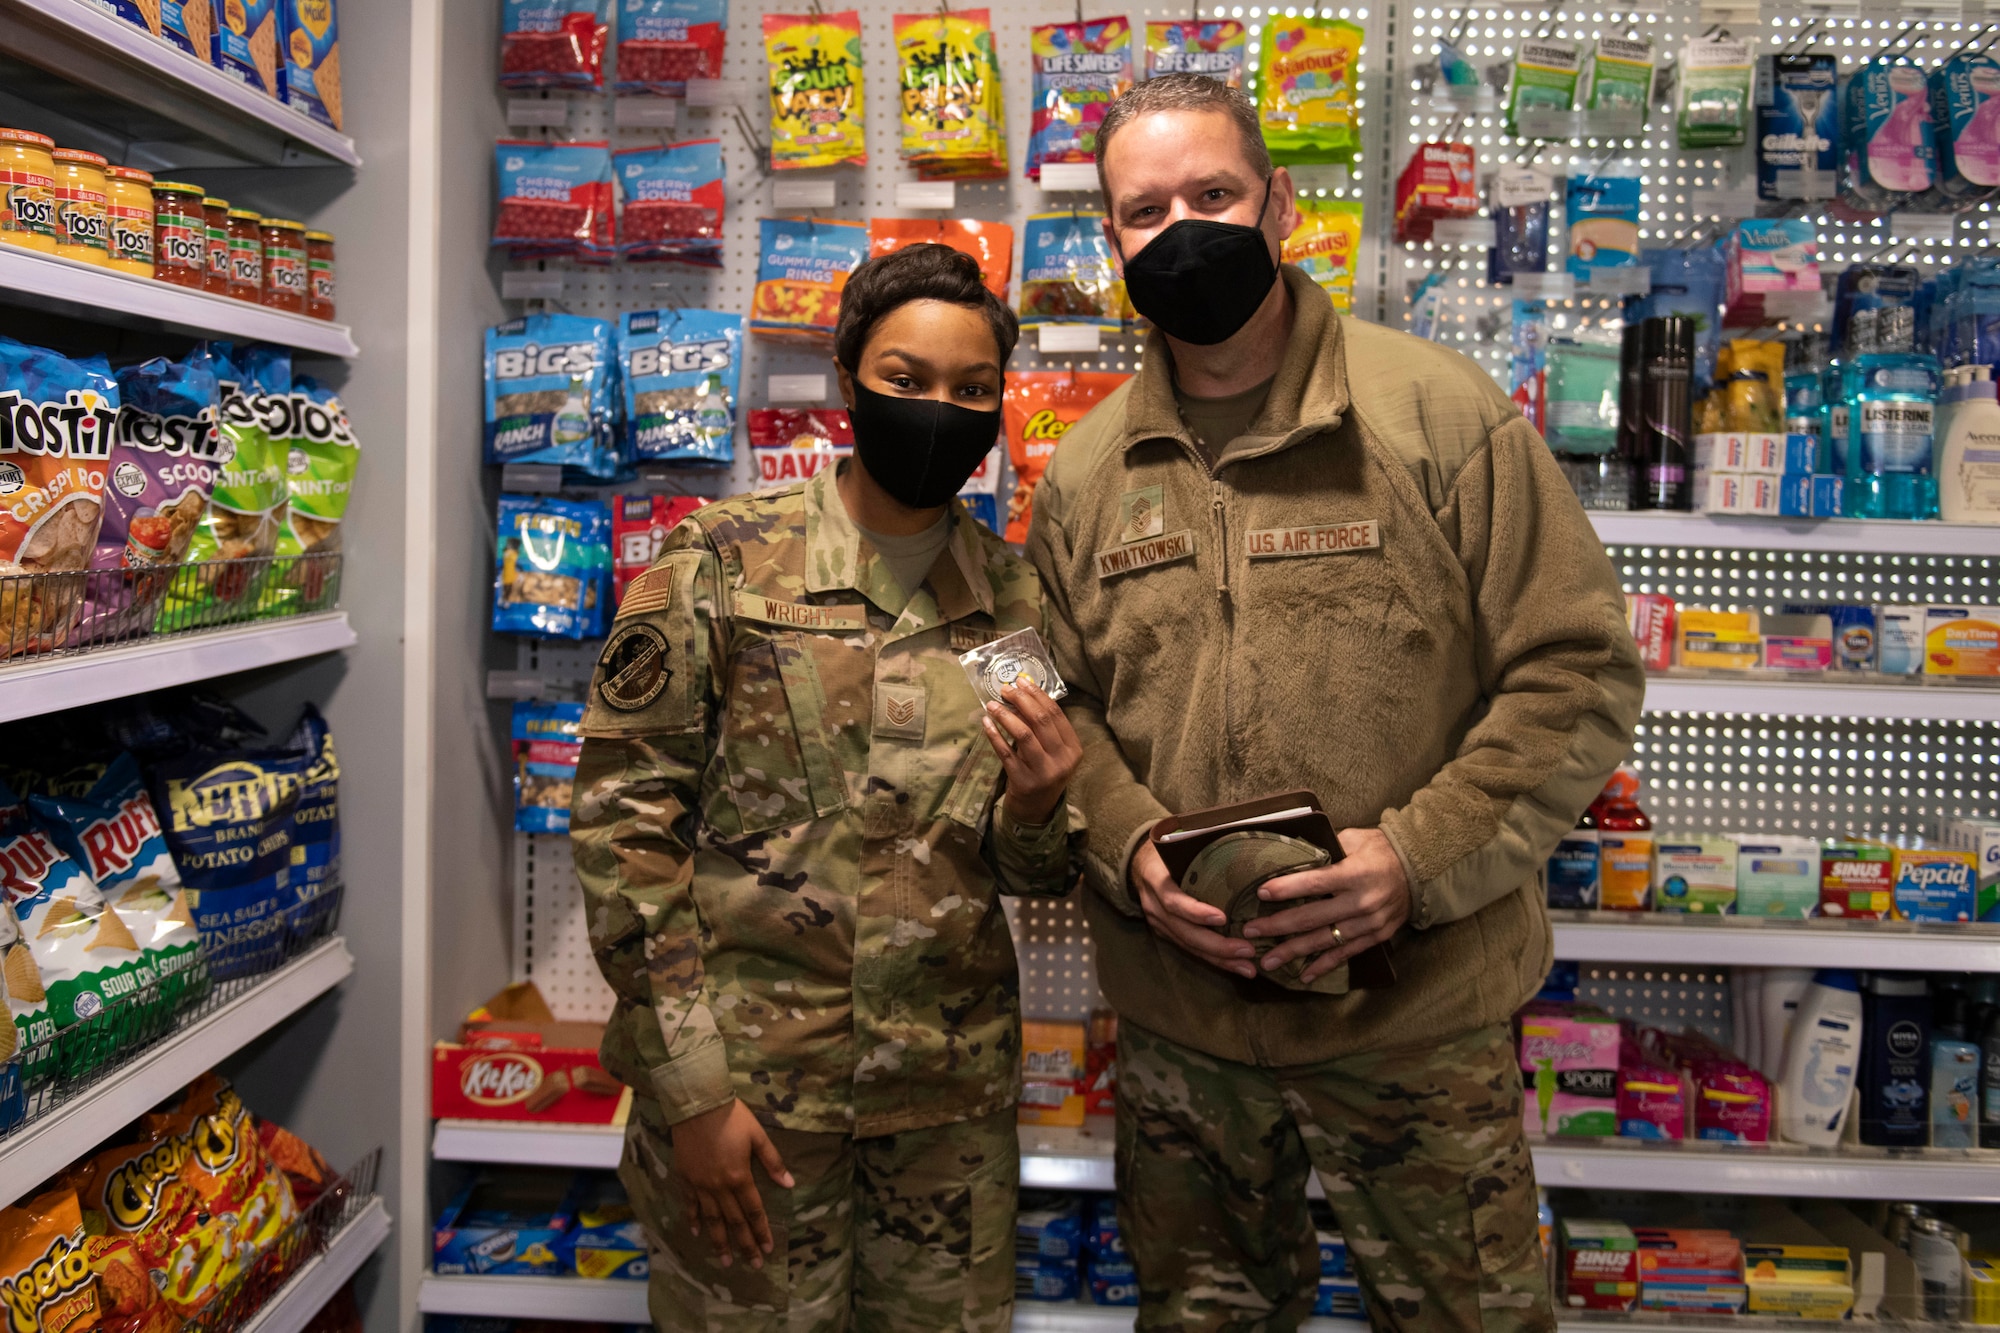 U.S. Air Force Chief Master Sgt. Randy Kwiatkowski, right, Third Air Force command chief, poses for a photo with Tech. Sgt. Tiara Wright, left, 420th Expeditionary Air Base Squadron financial operations flight chief and officer in charge of base AAFES troop store, at the Army and Air Force Exchange Service shoppette at Royal Air Force Fairford, England, Oct. 28, 2020. The Third Air Force command team toured six bases in the 501st Combat Support Wing as part of a new commander’s immersion tour. (U.S. Air Force photo by Senior Airman Jennifer Zima)